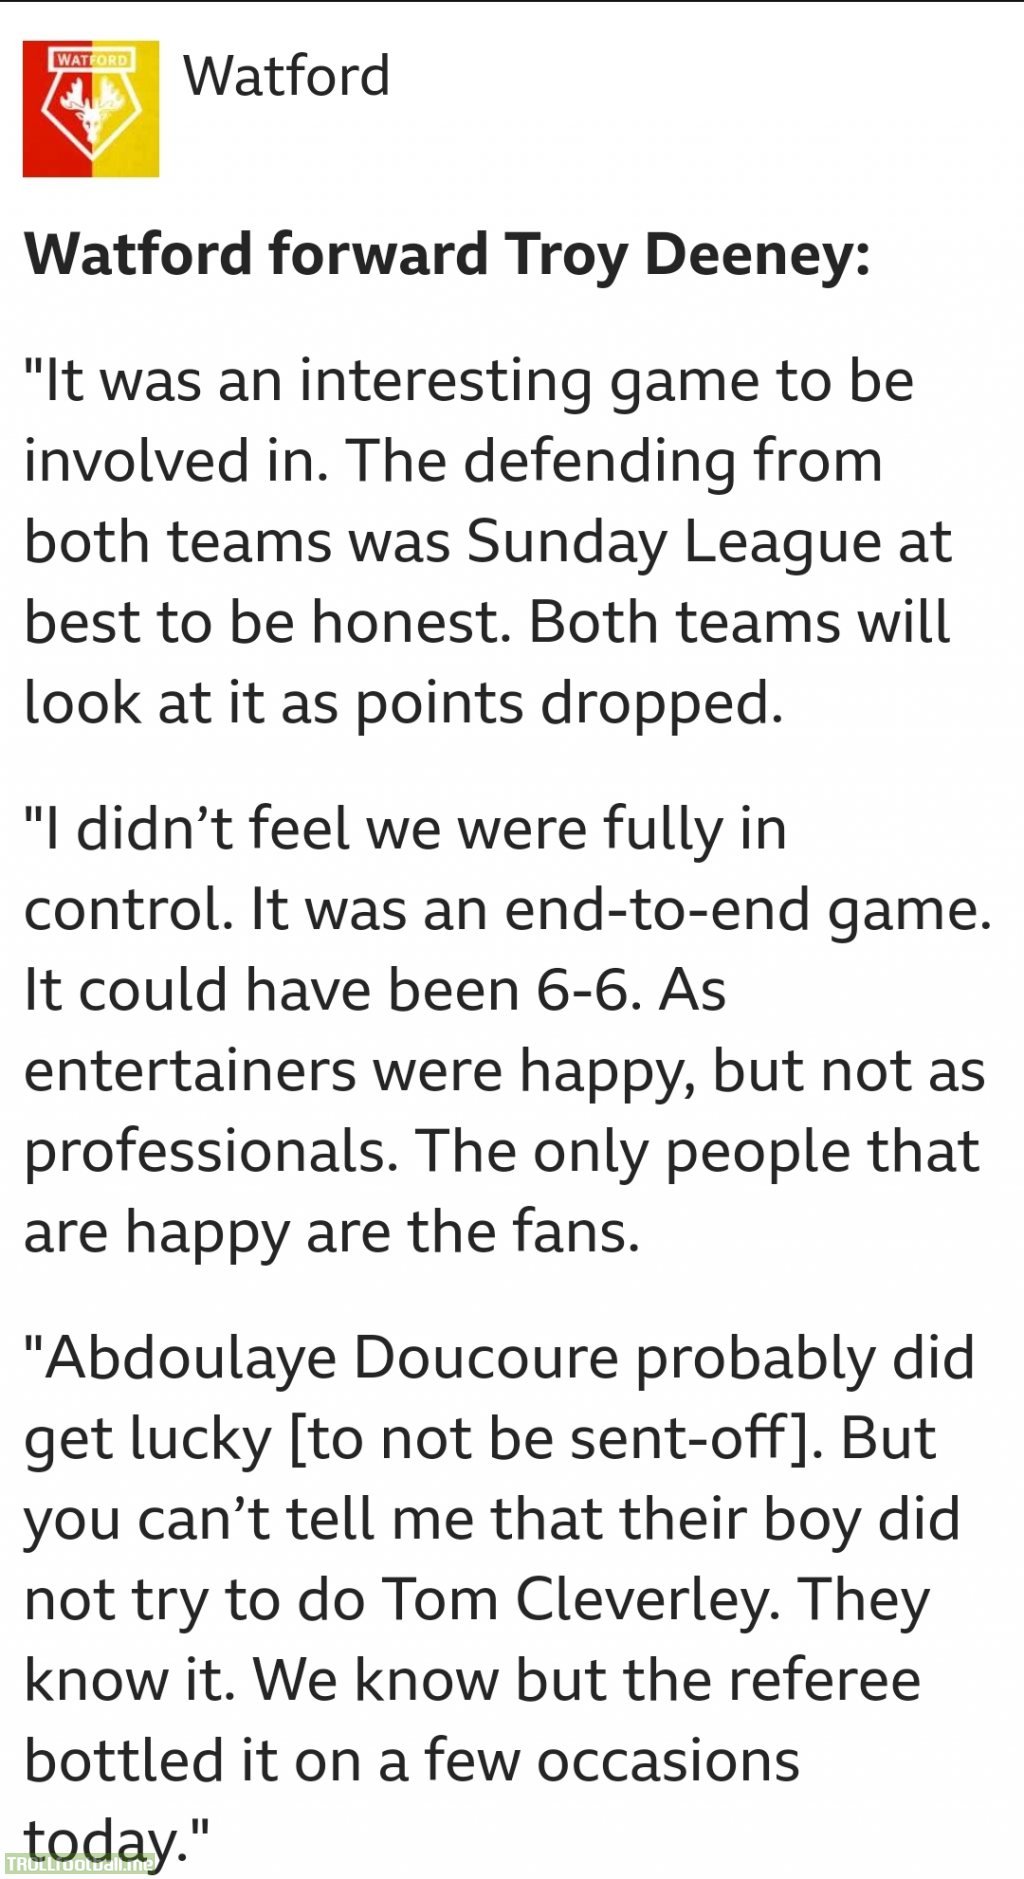 Troy Deeney on the match against Bournemouth and the referee.